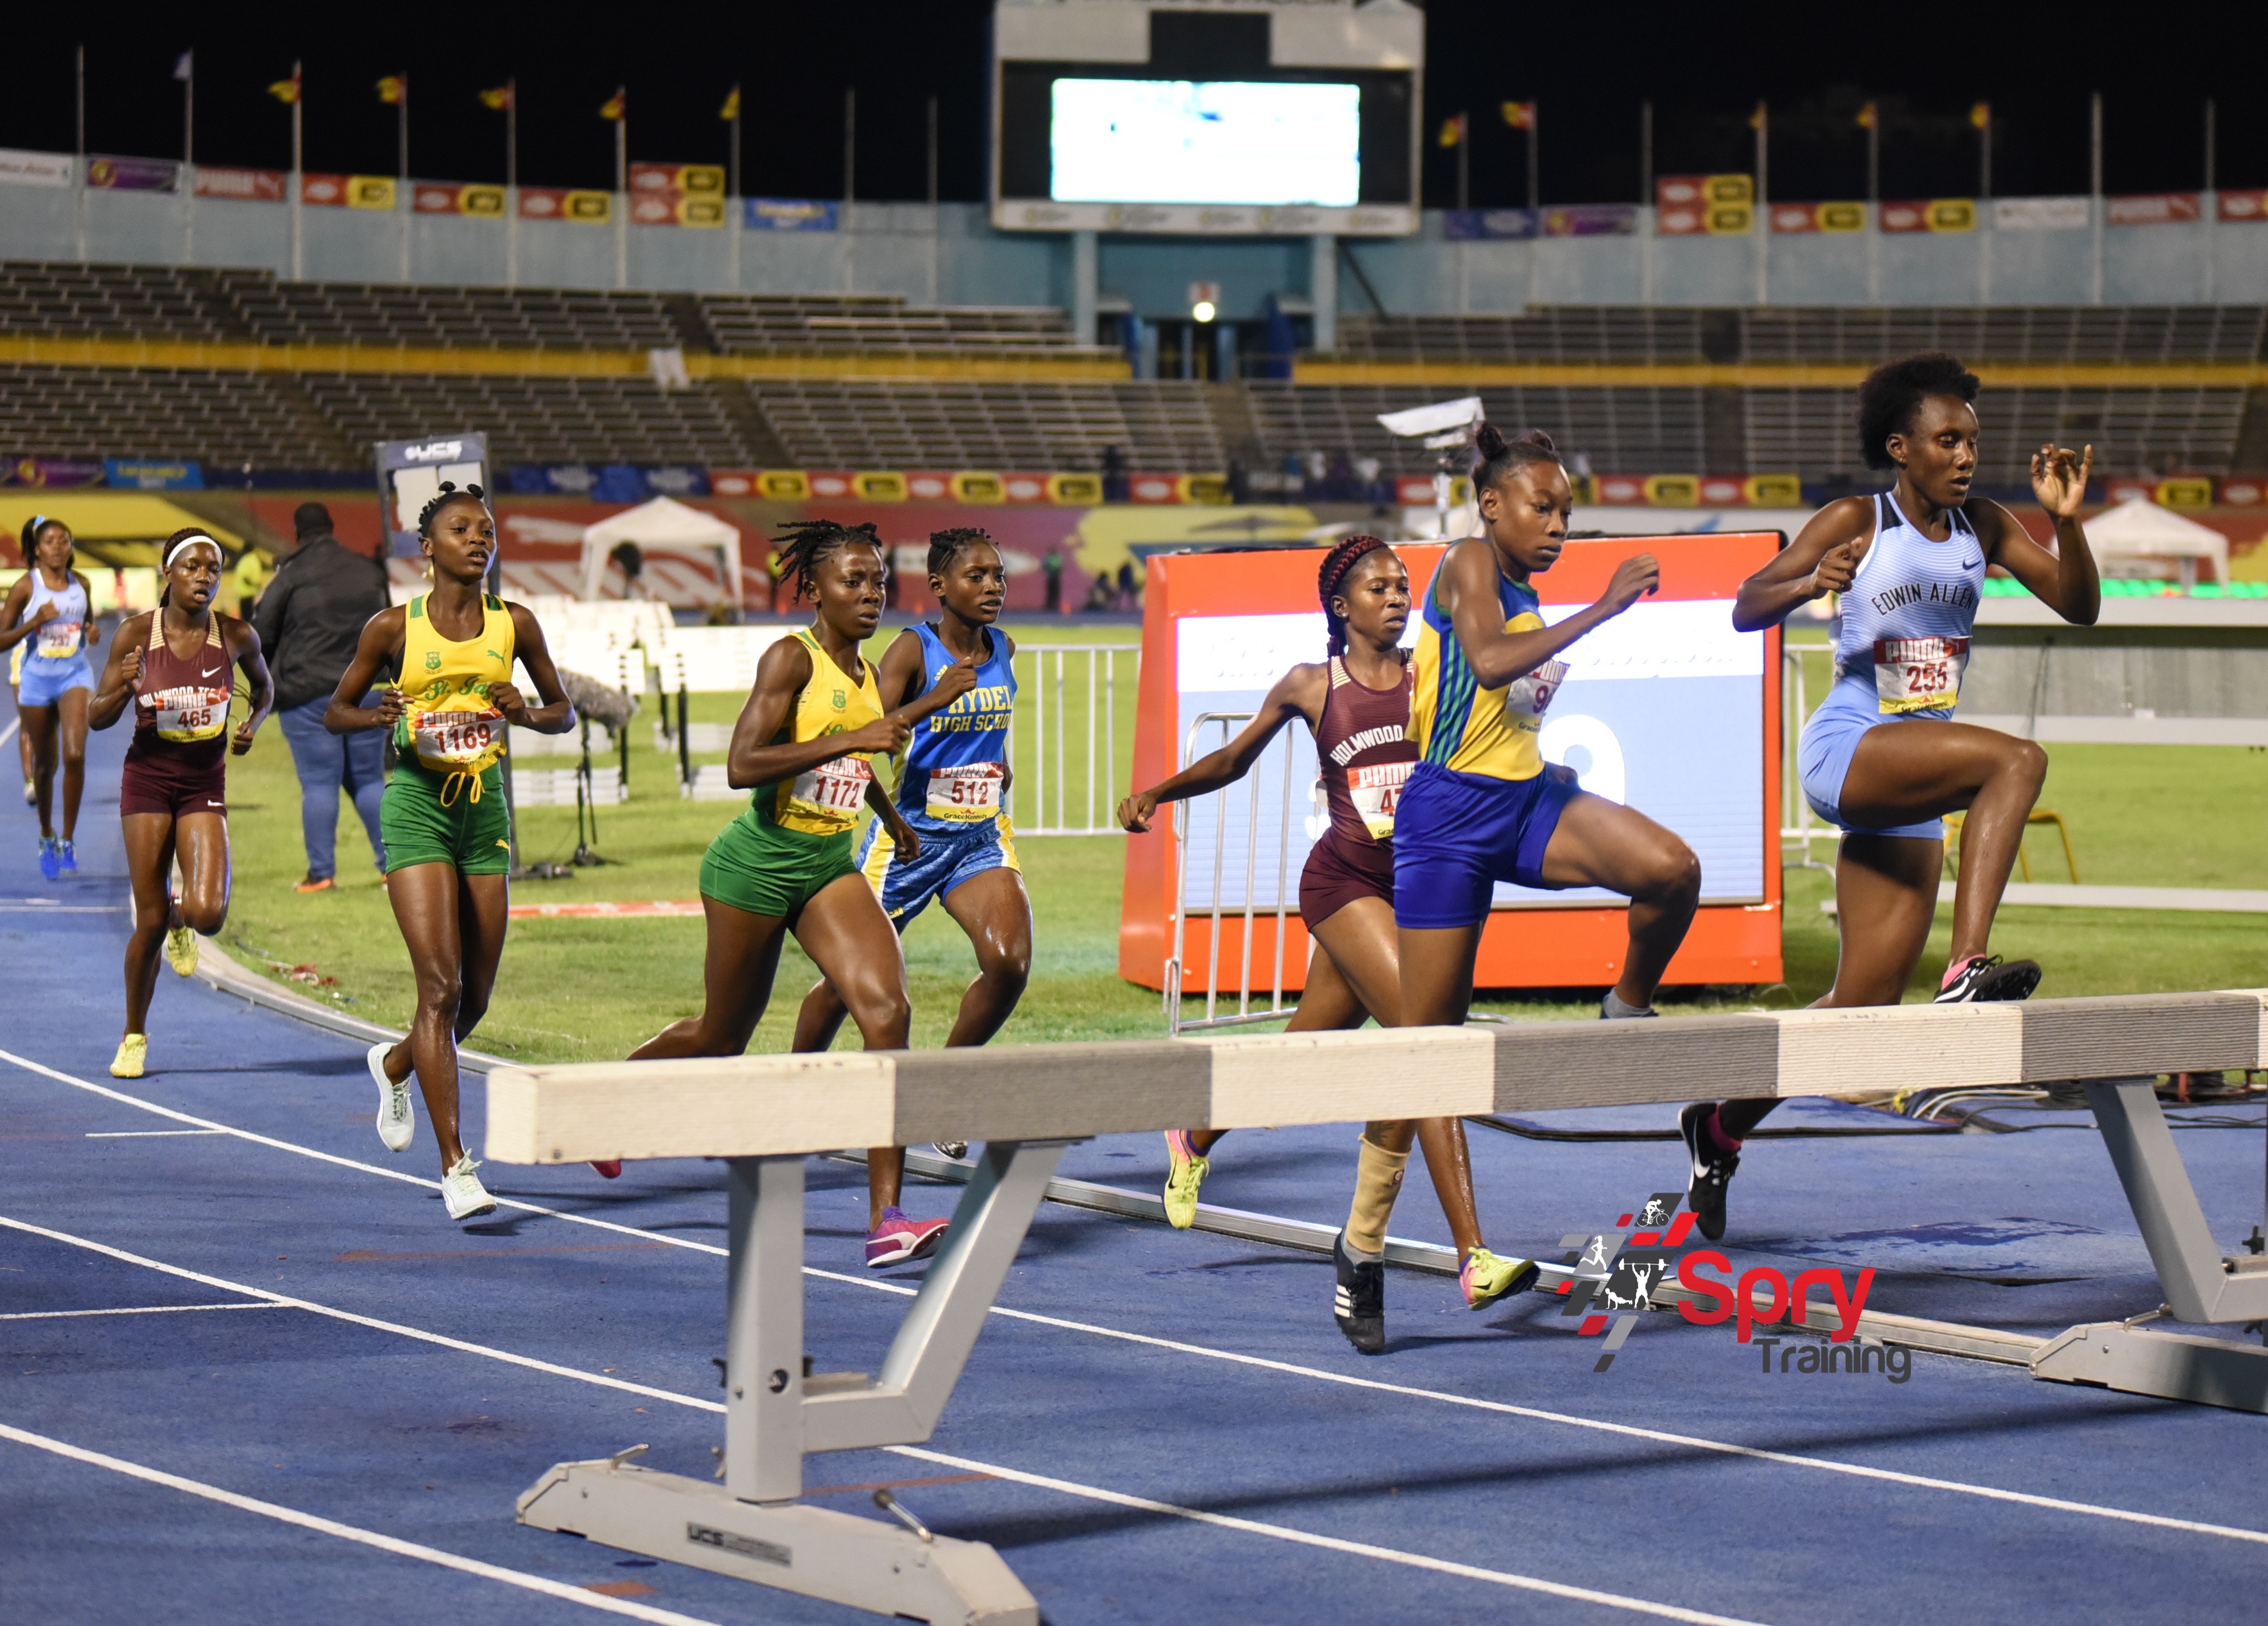 Champs 2020 decision in 24 hours says Jamaica’s Health Minister